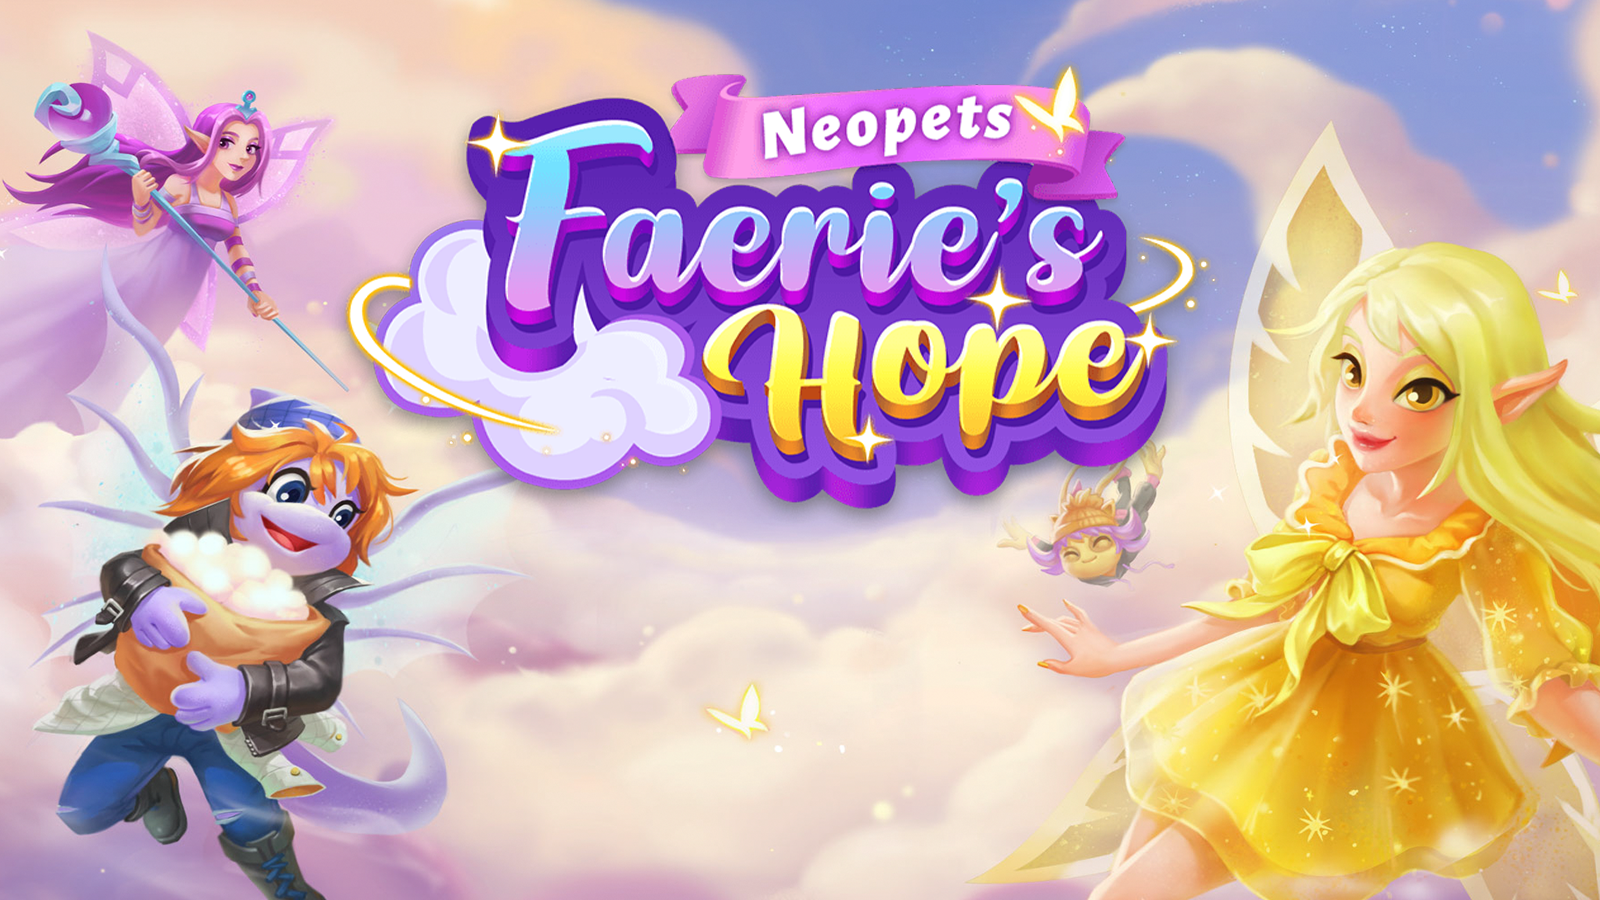 https://portal.neopets.com/images/about-neopets/NP_FH_Key_image-2.png